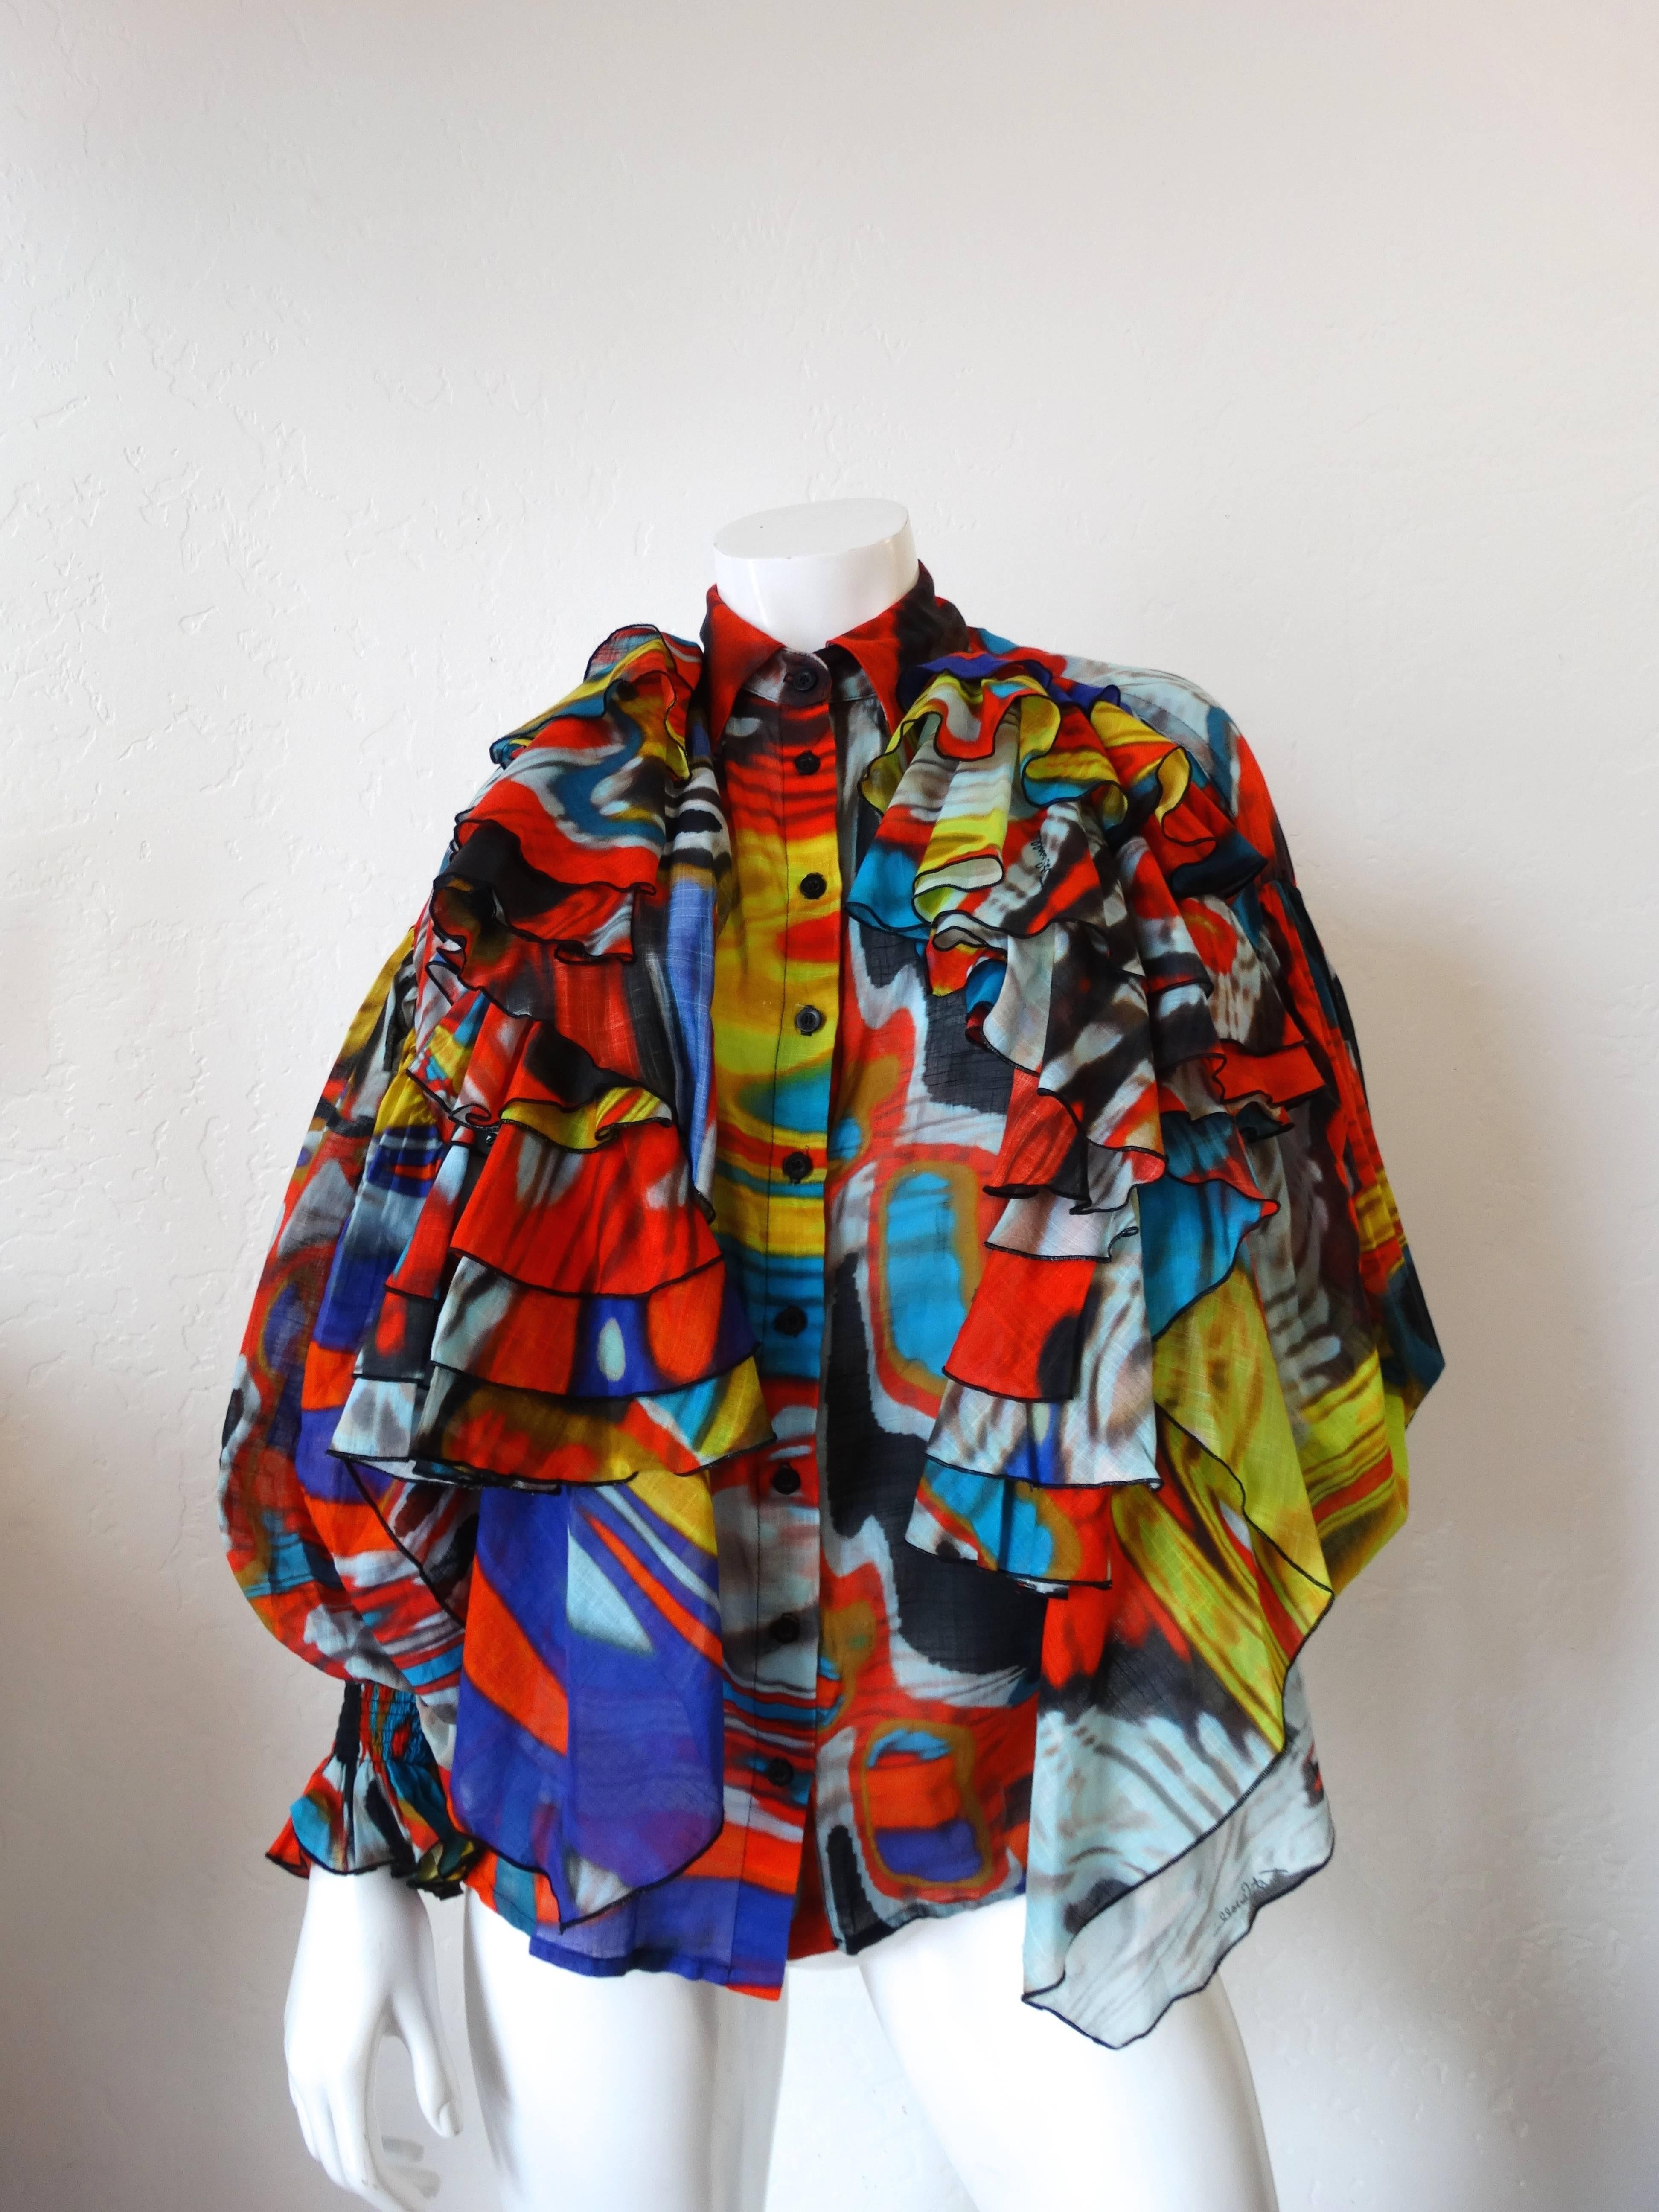 Avant Garde Just Cavalli Camicia Ruffle Top. Buttons up the front. Dramatic flared sleeves with cinched, elasticized cuffs. With ruffle detail at both shoulders. Psychedelic multicolored marble print. New with tags, never been worn.
Marked a size